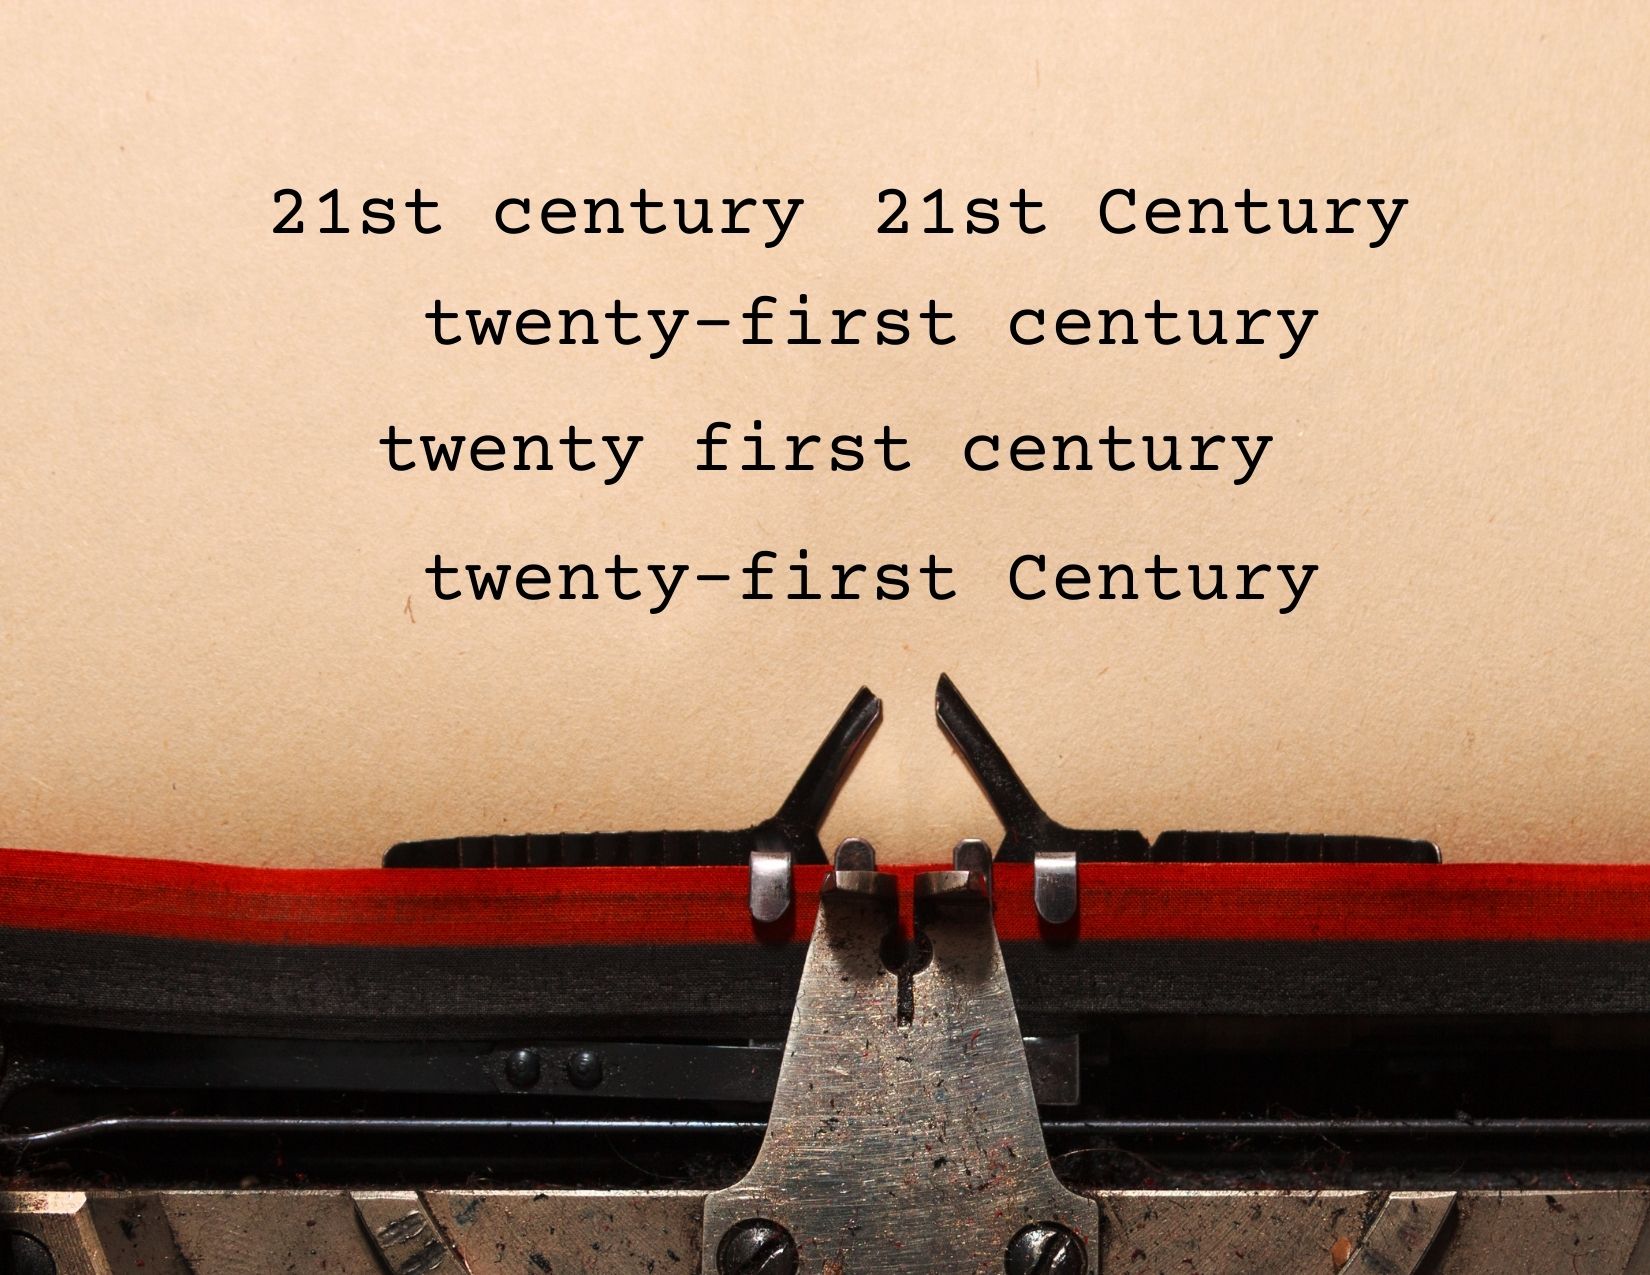 A typewriter with a page that featured various variations of spelling "twenty first century" with some being capitalized and hyphenated